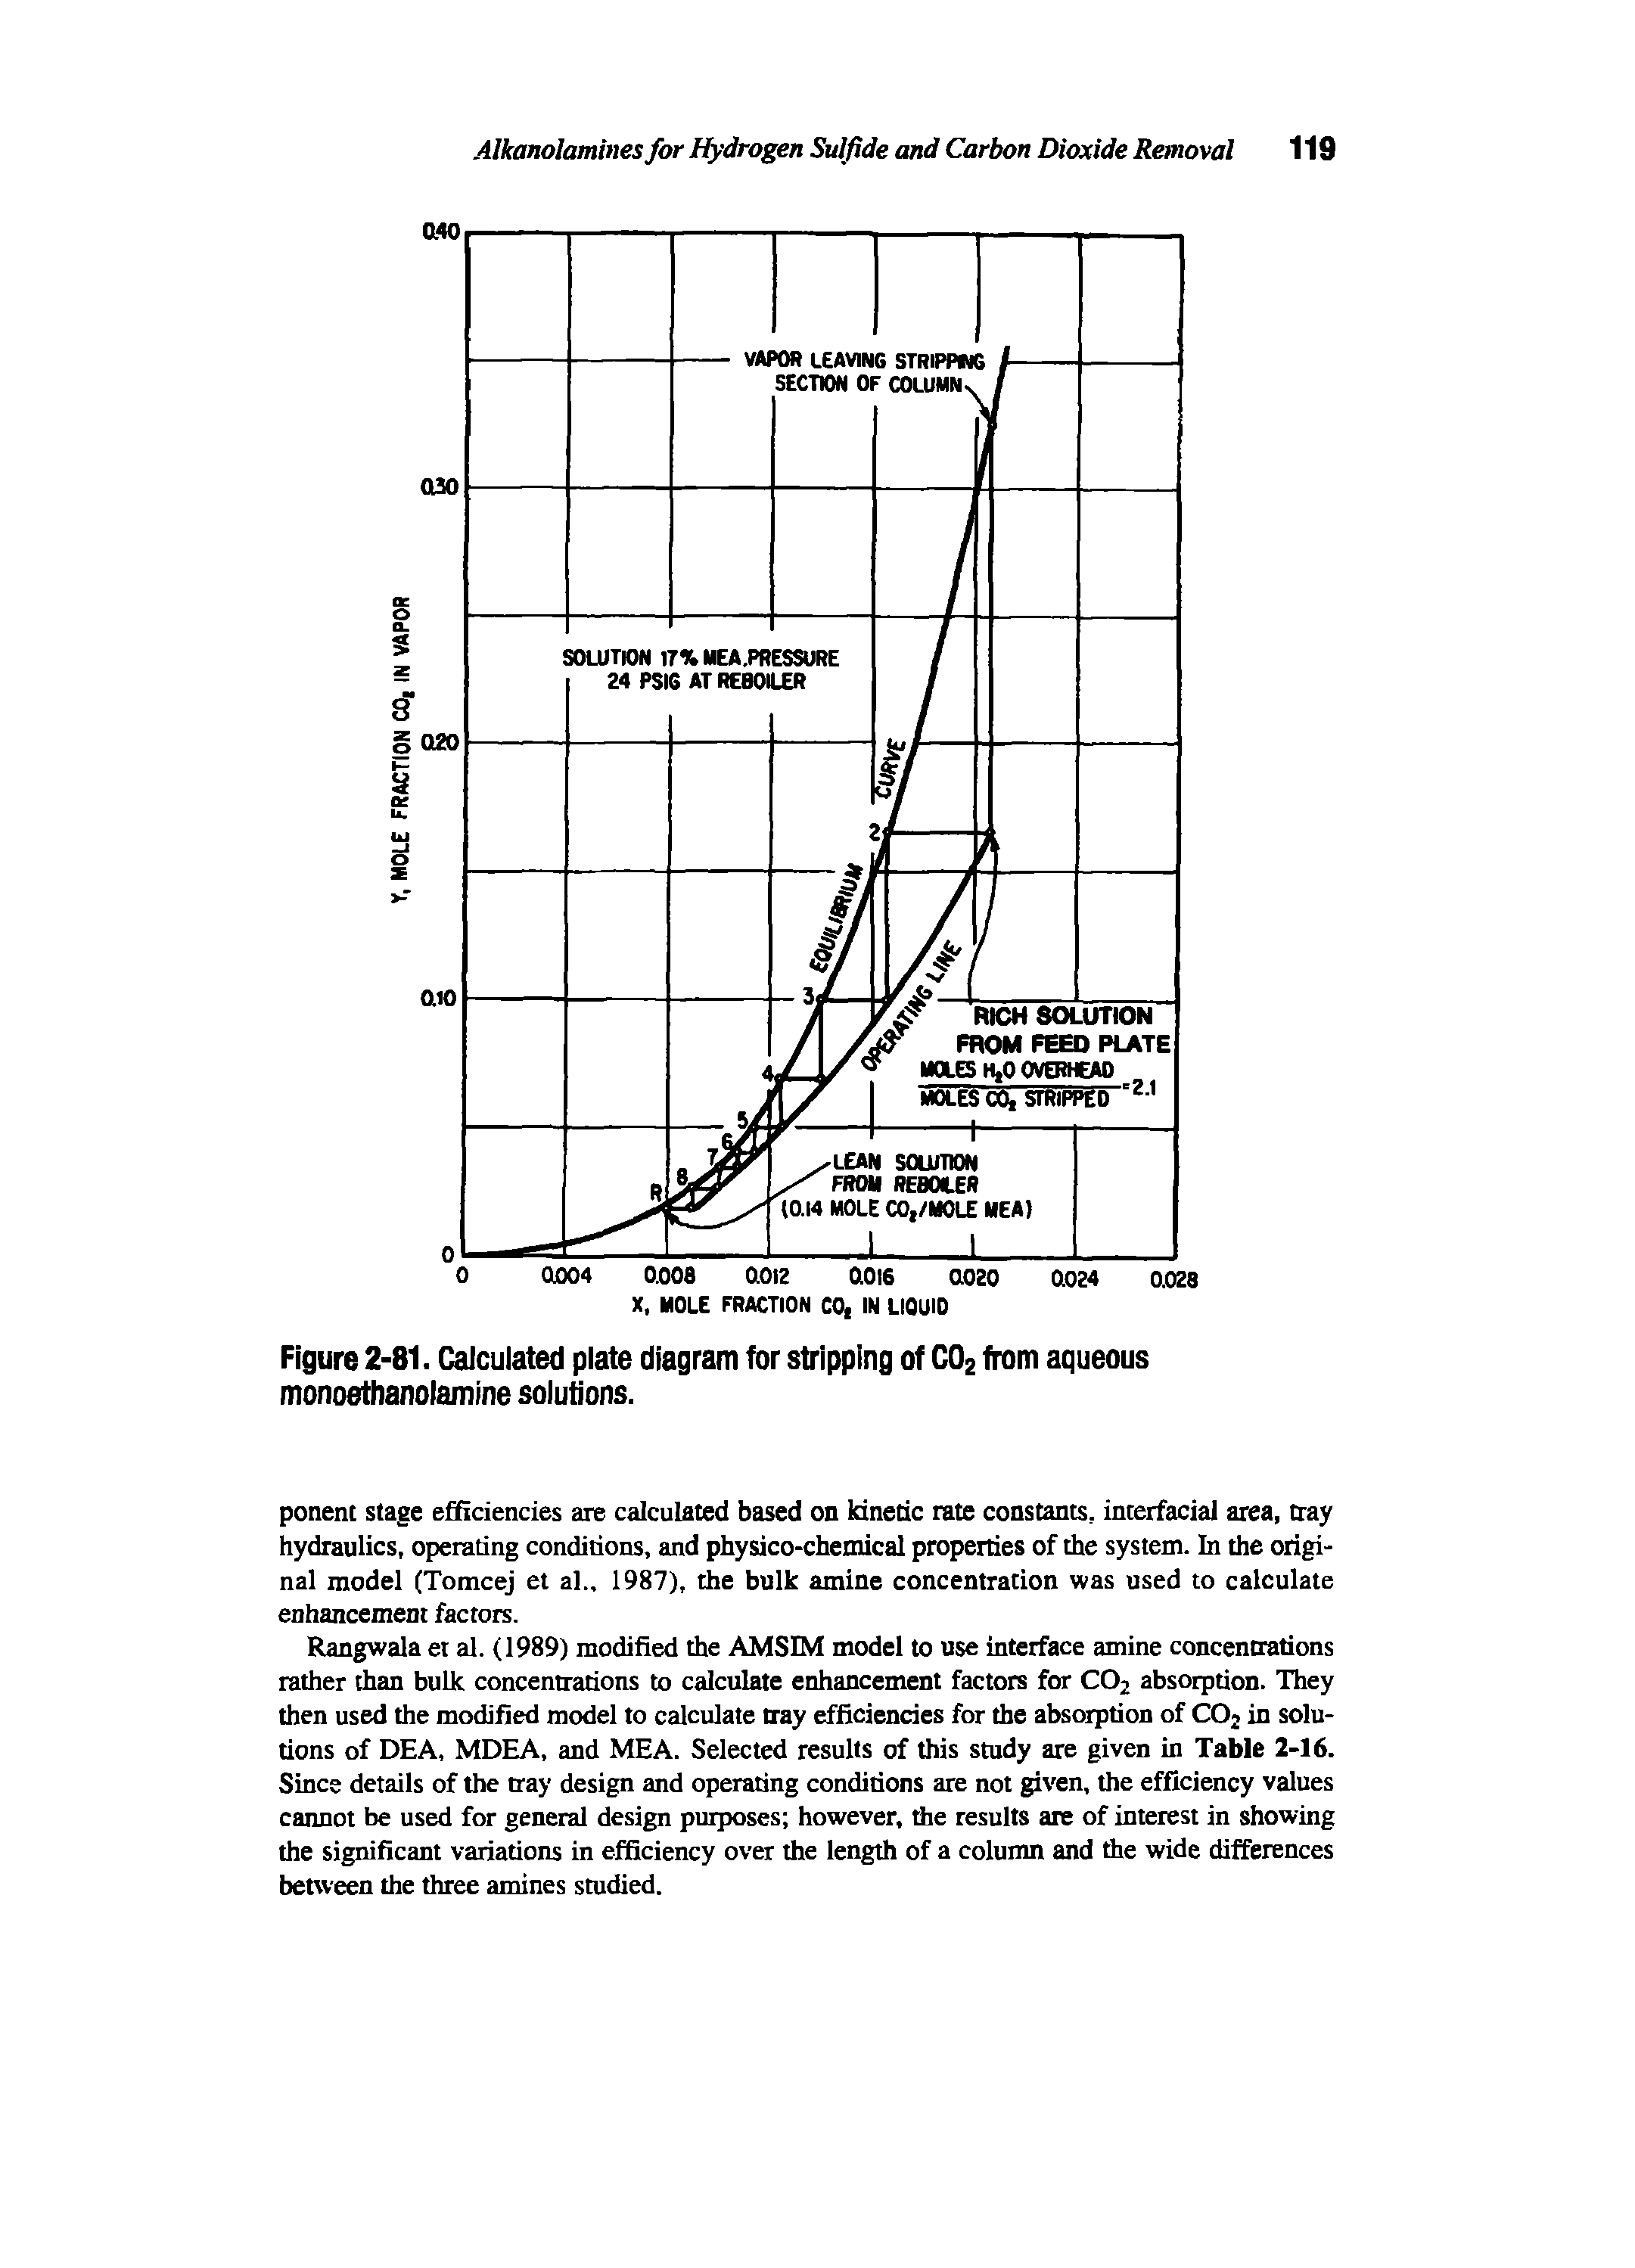 Figure 2-81. Calculated plate diagram for stripping of CO2 from aqueous monoethanolamine solutions.